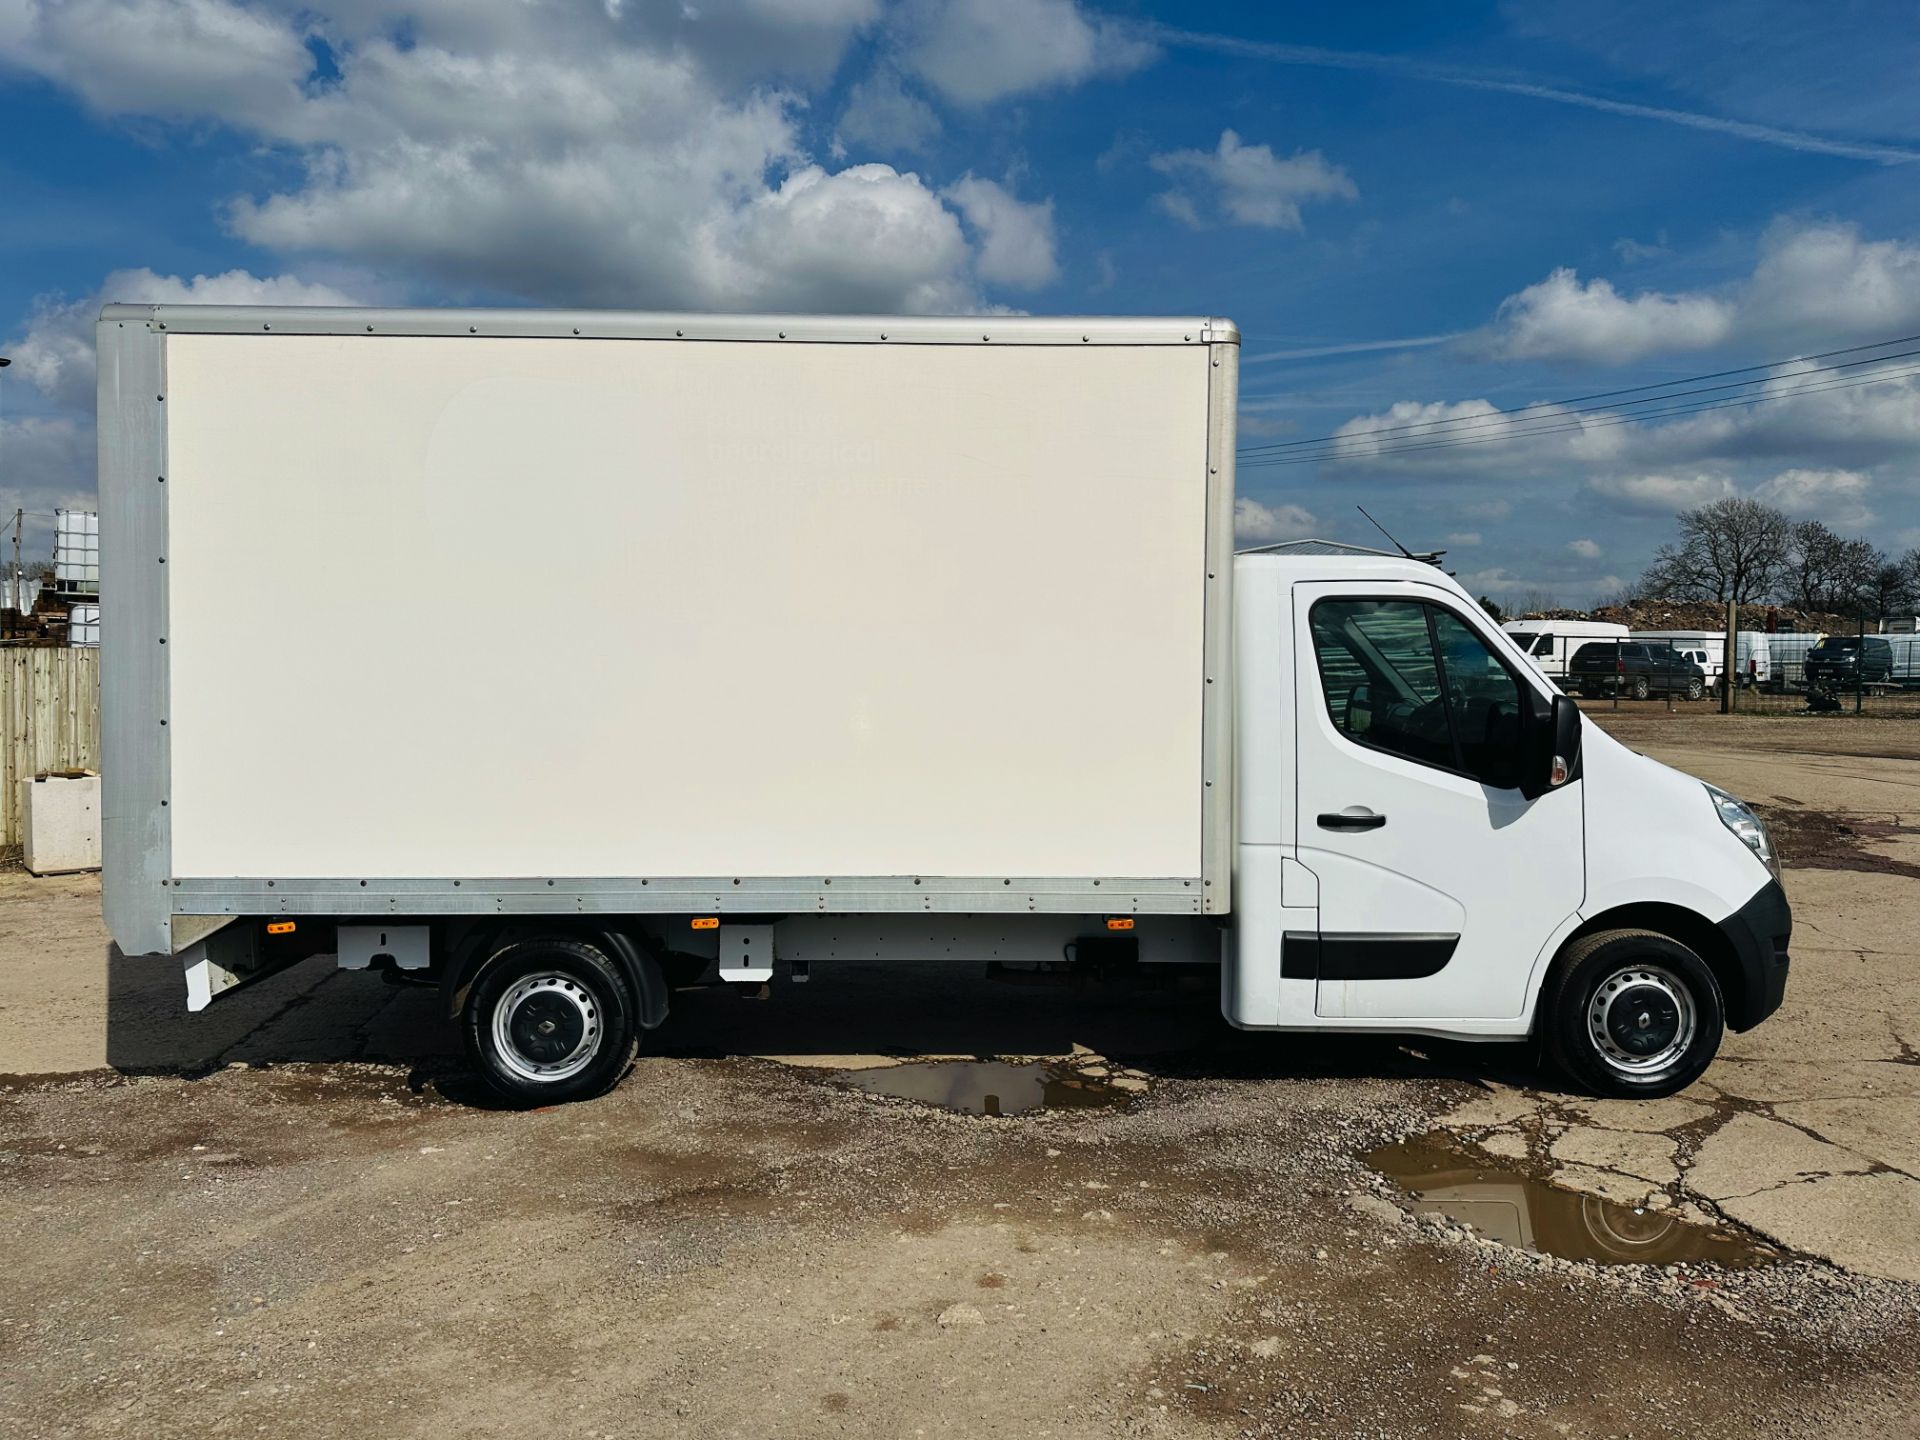 Renault Master 2.3 DCI 130 Business Edition Lwb (Luton / Box Van) - 2019 Model - Euro 6 - Tail Lift - Image 10 of 27